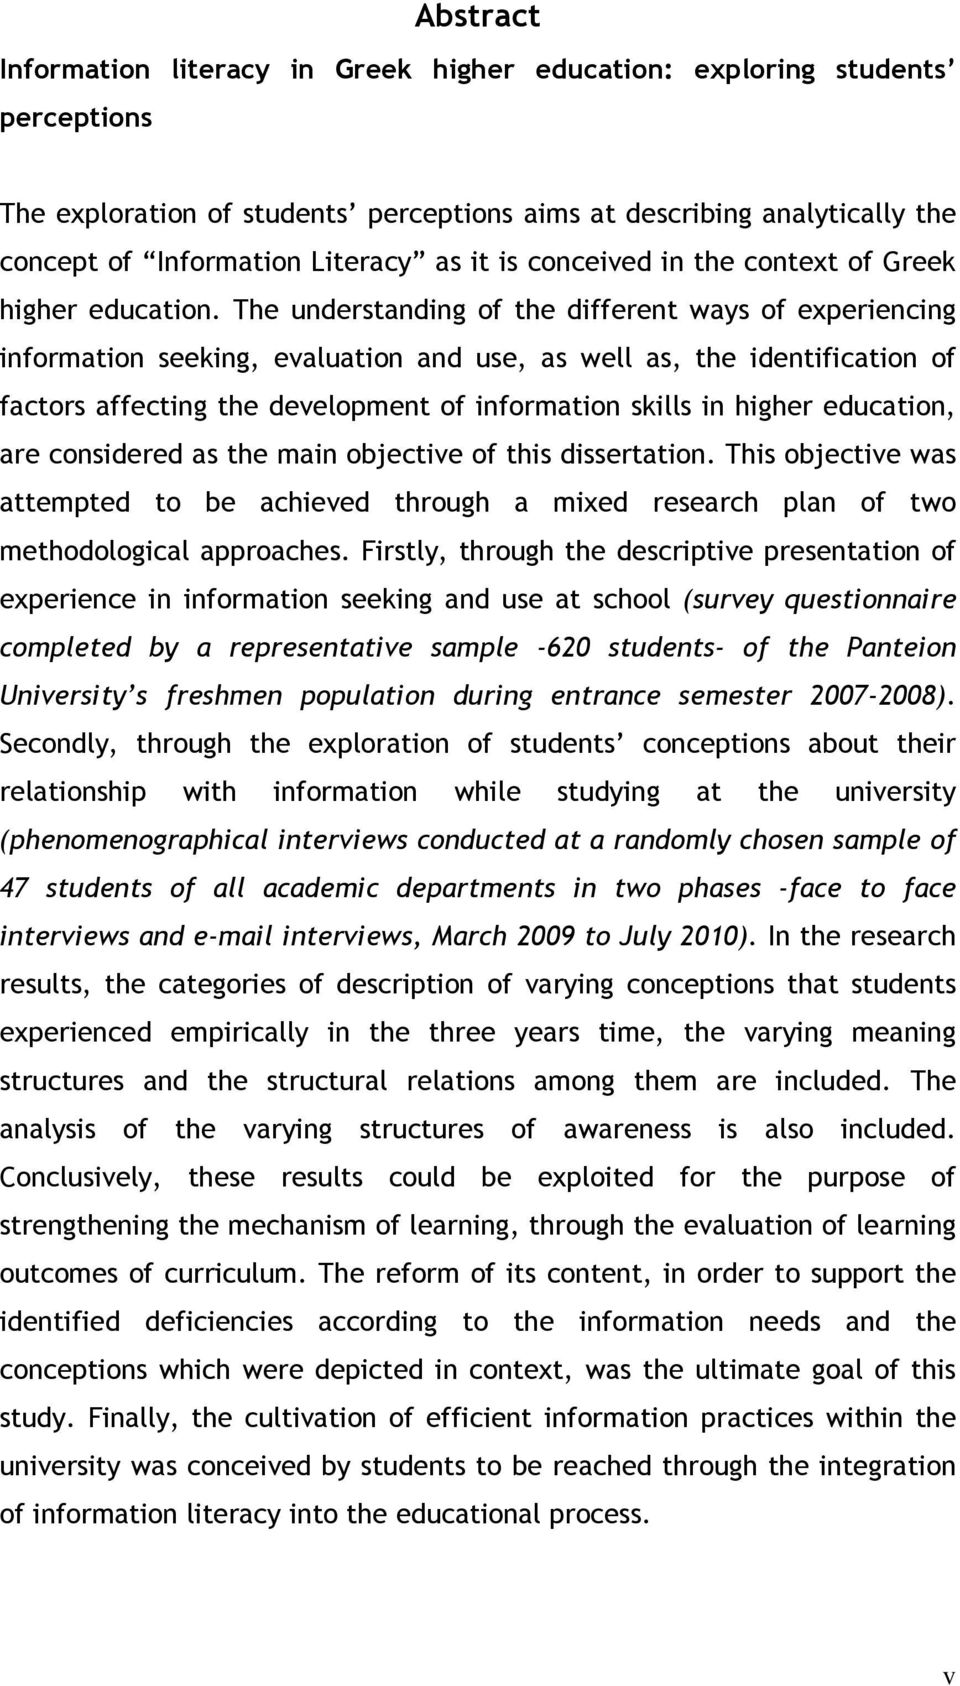 The understanding of the different ways of experiencing information seeking, evaluation and use, as well as, the identification of factors affecting the development of information skills in higher